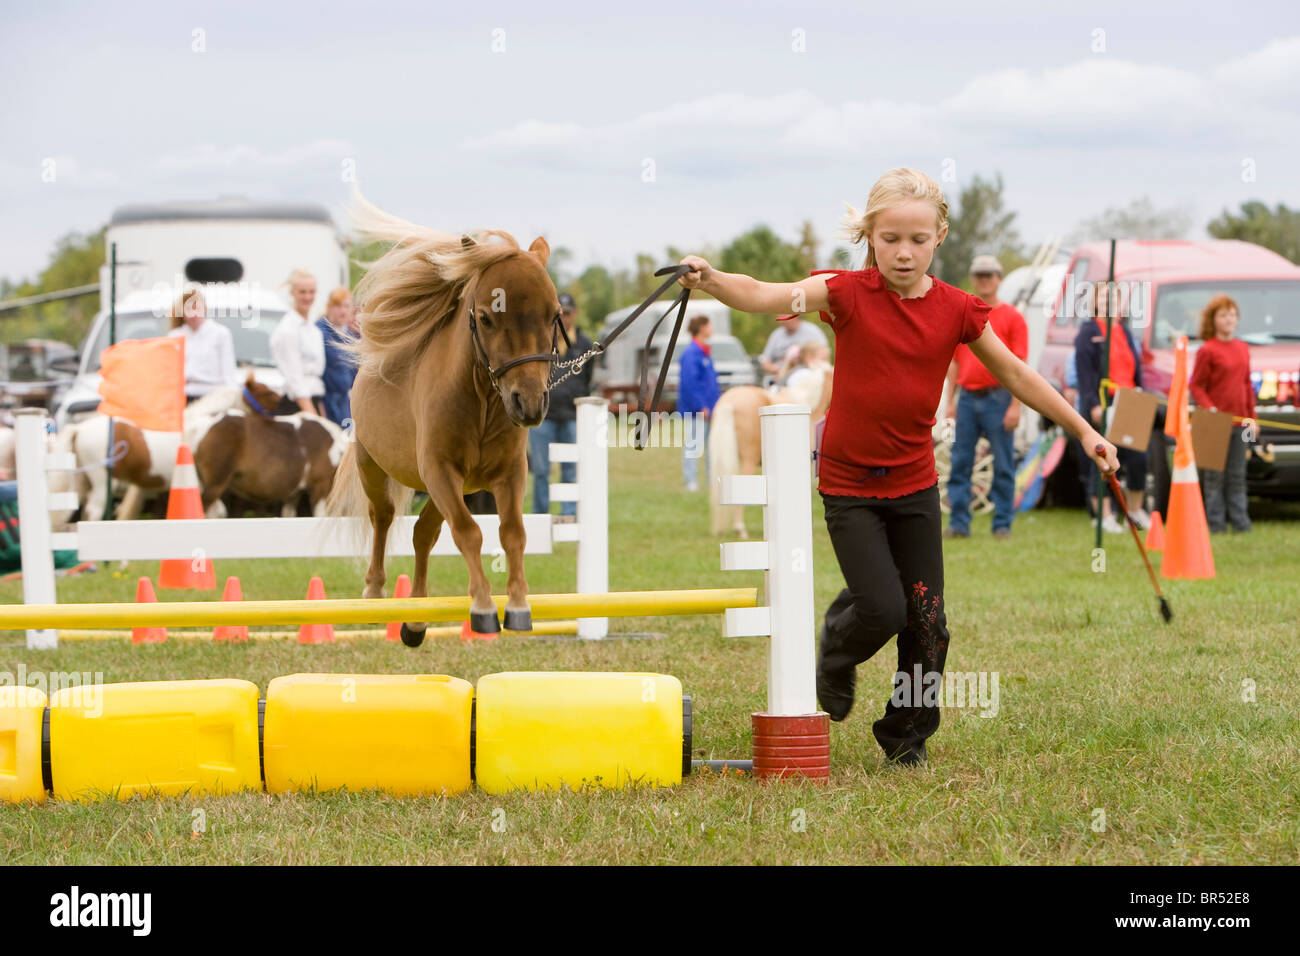 North America Canada Ontario girl with miniature pony at agricultural fair Stock Photo